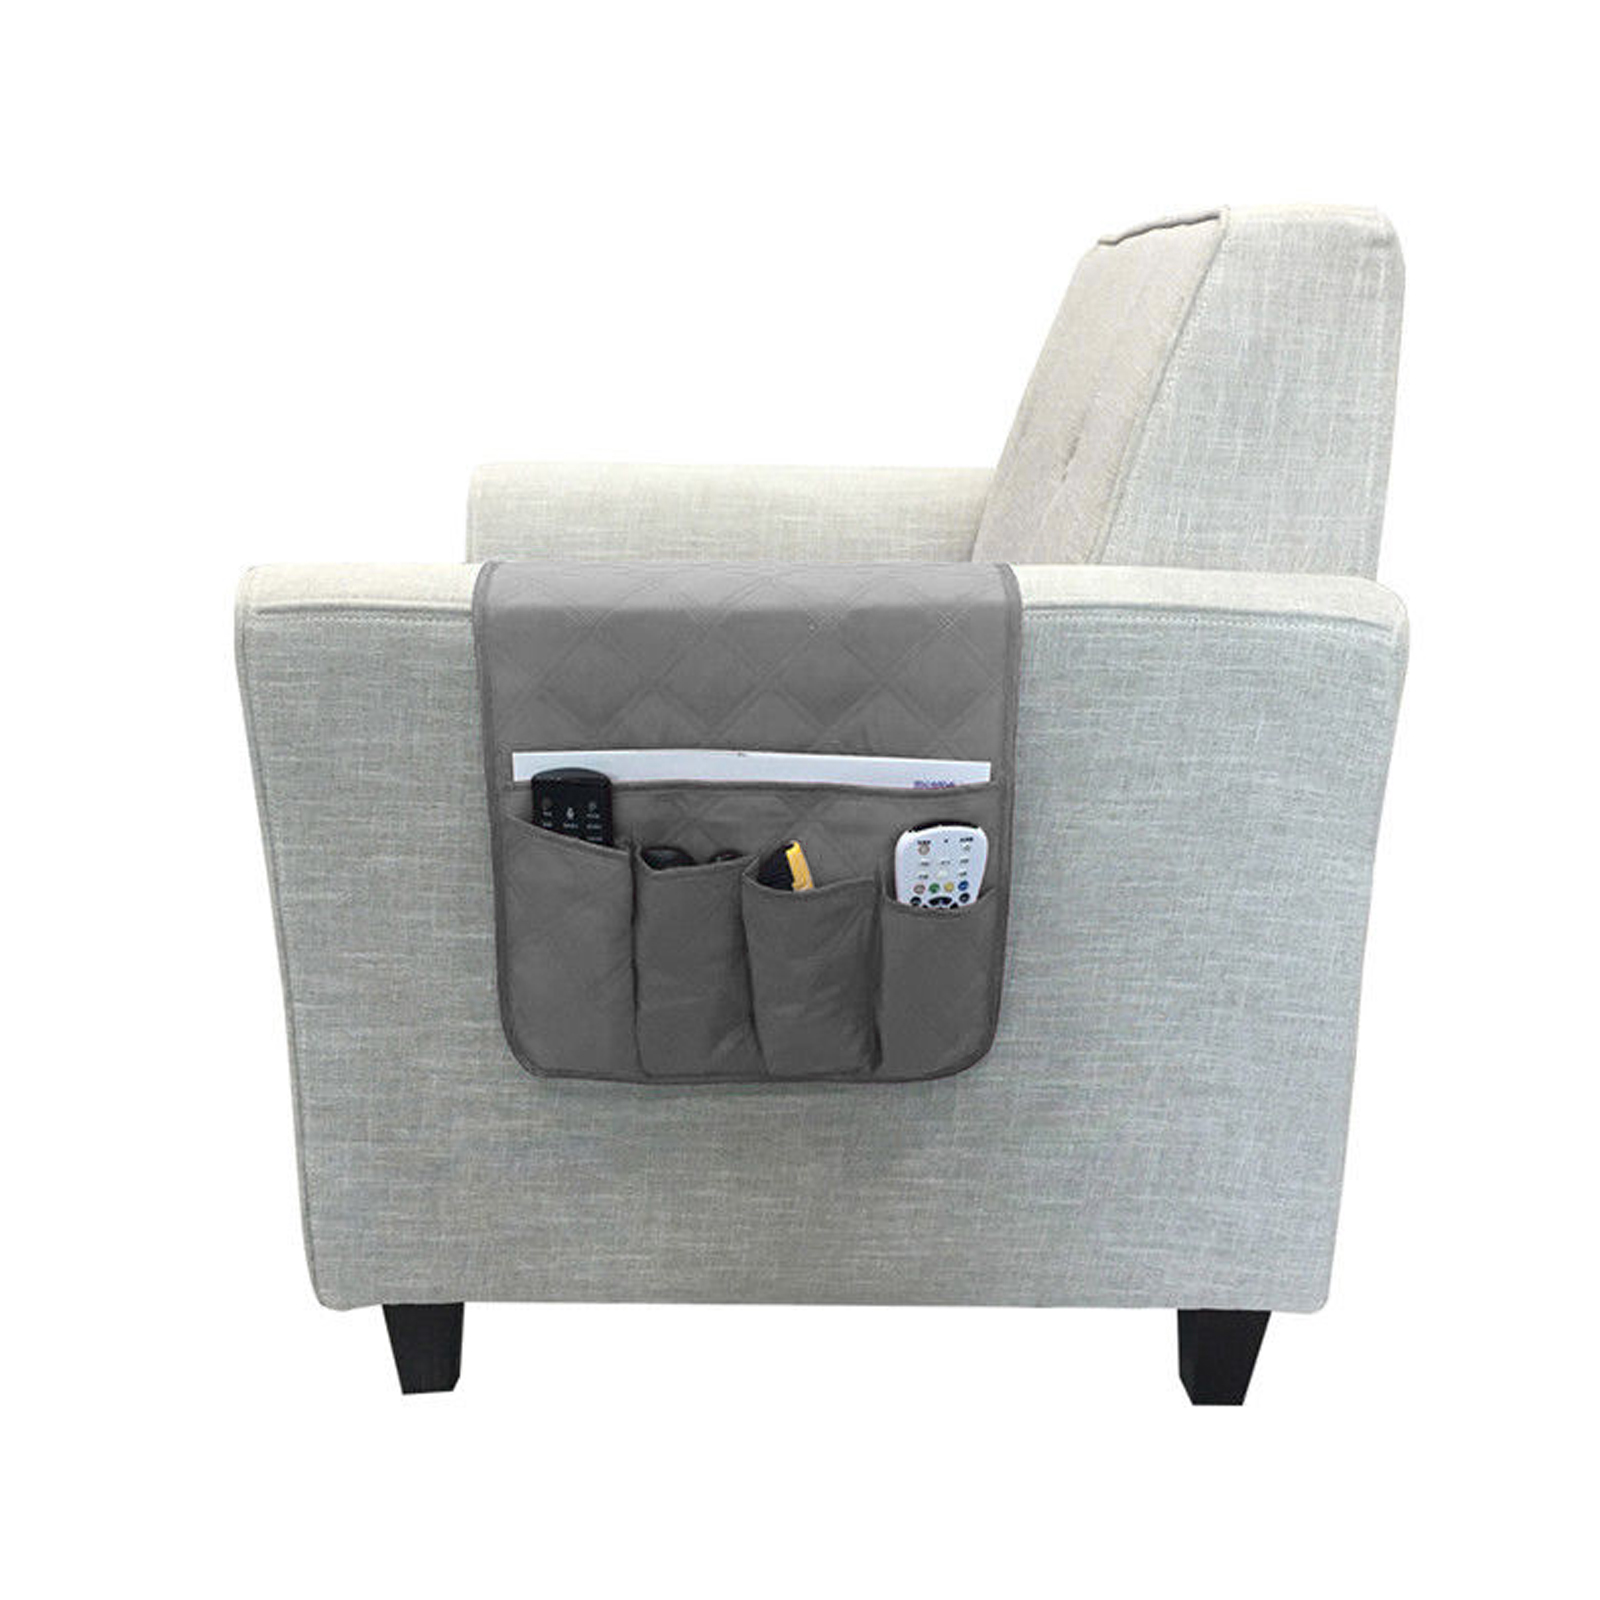 Magazines Gray Ipad Book Xhwykzz Couch Sofa Remote Control Holder with 5 Pockets Chair Armchair Caddy for Smart Phone 